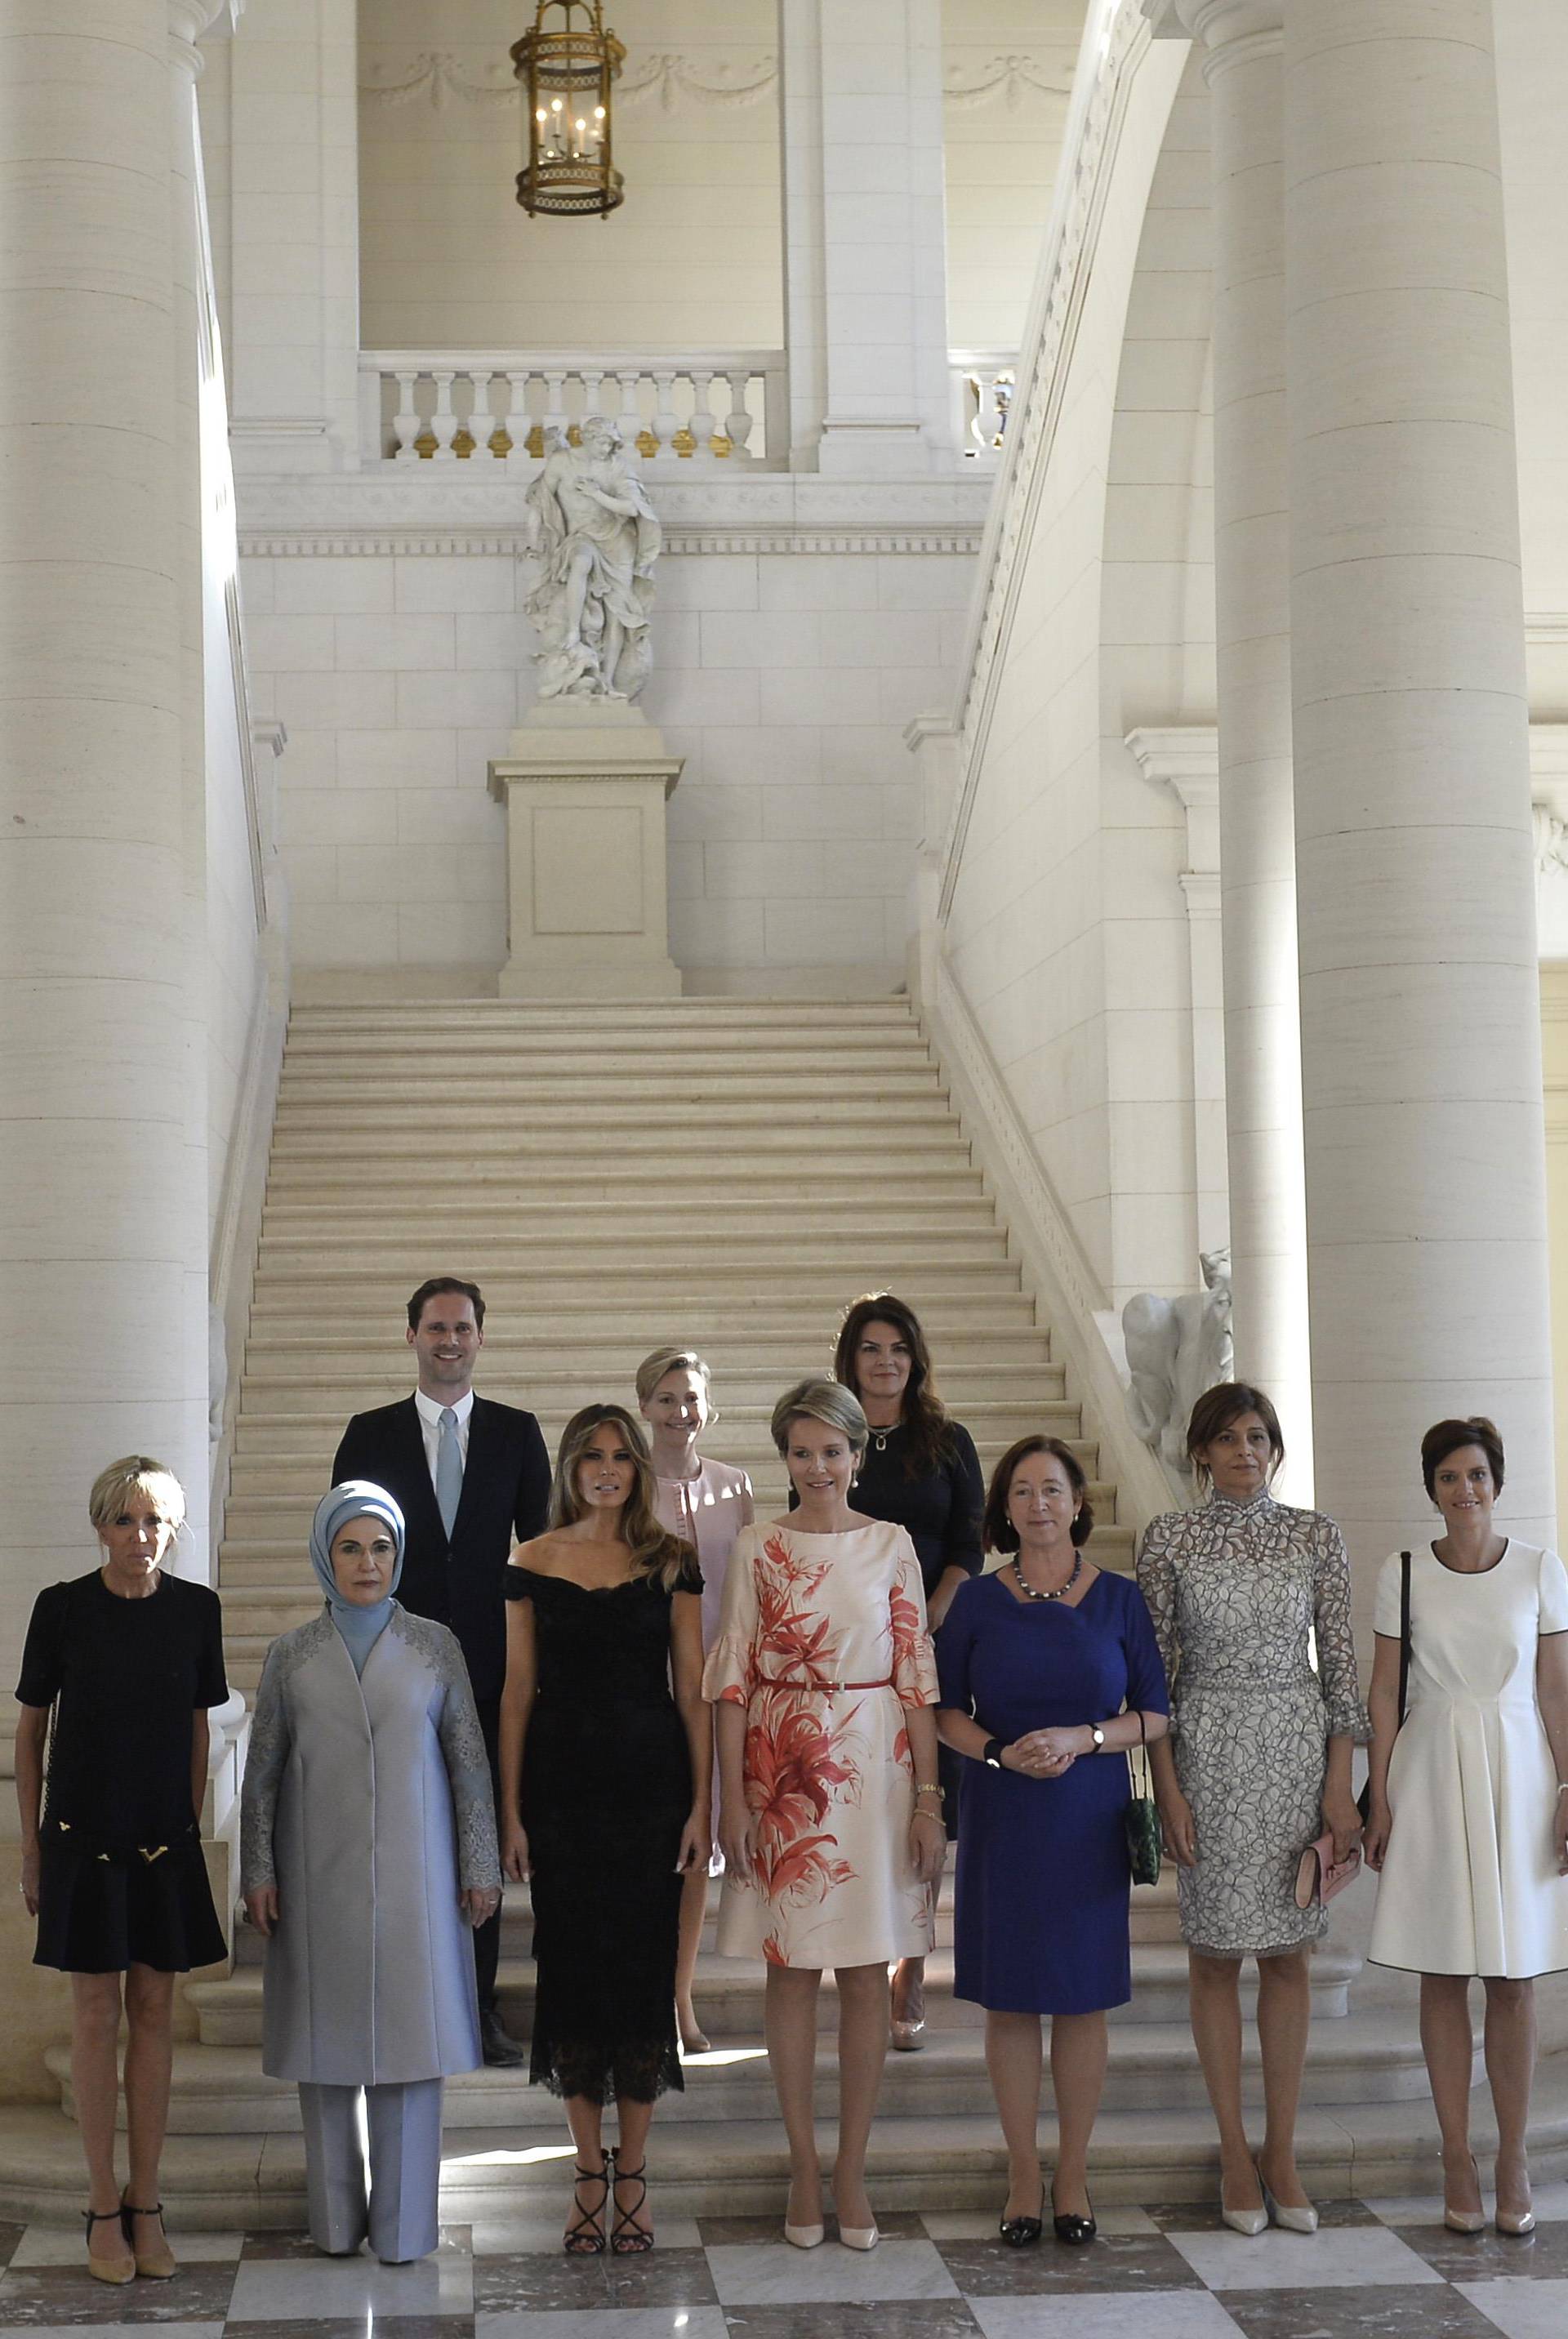 Queen Mathilde of Belgium poses for a group picture at the Royal Castle of Laeken in Brussels